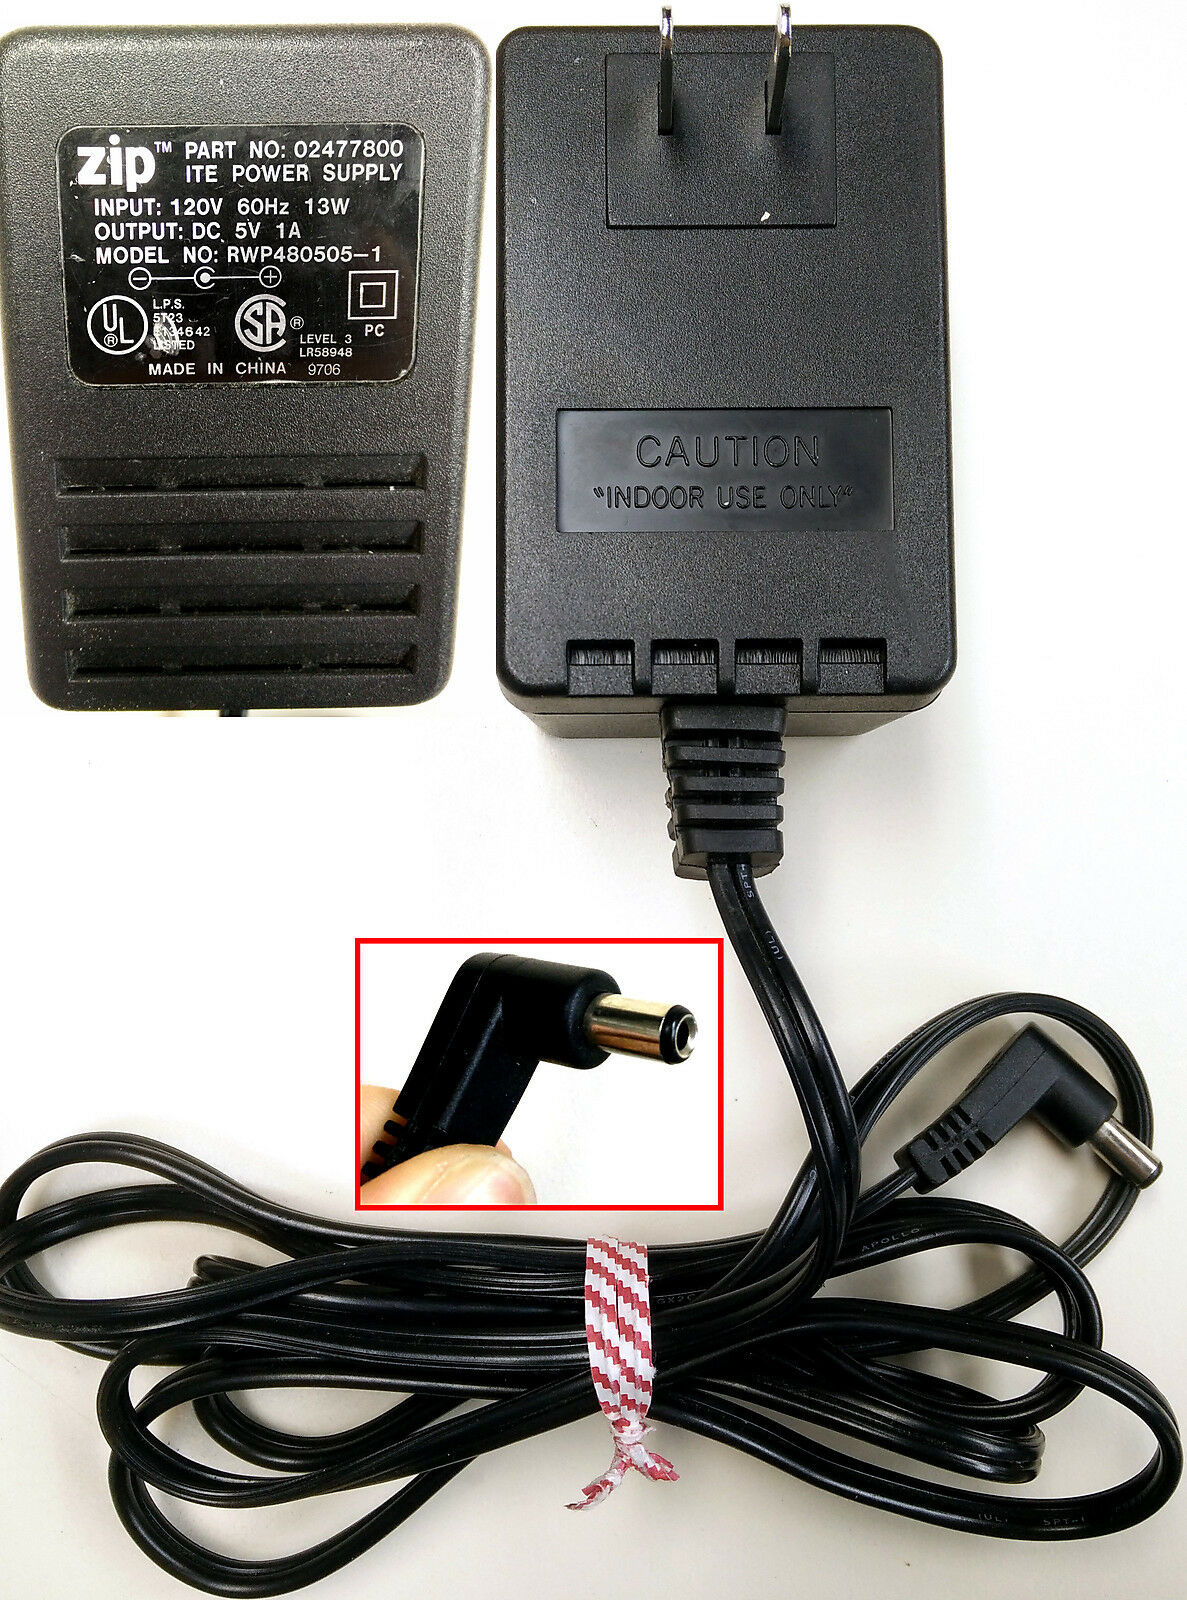 NEW Iomega Zip Drive 02477800 5V 1A AC DC Adapter RWP480505-1 ITE Power Supply - Click Image to Close